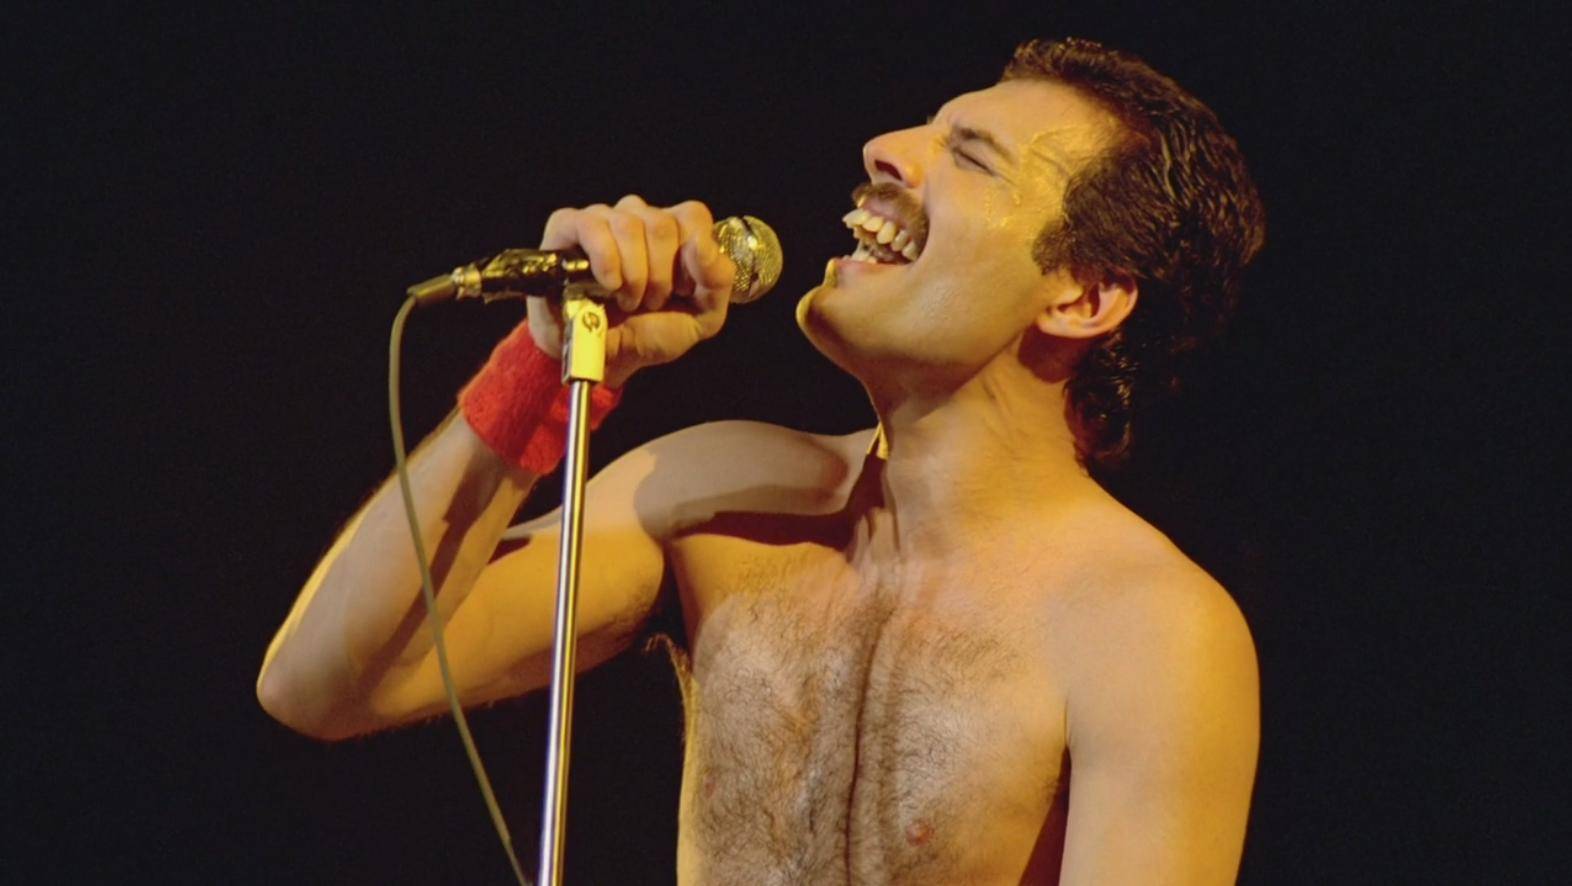 INTERVIEW | Peter Freestone: It wasn't the right Freddie for me in Bohemian Rhapsody. He laughed much more in real life